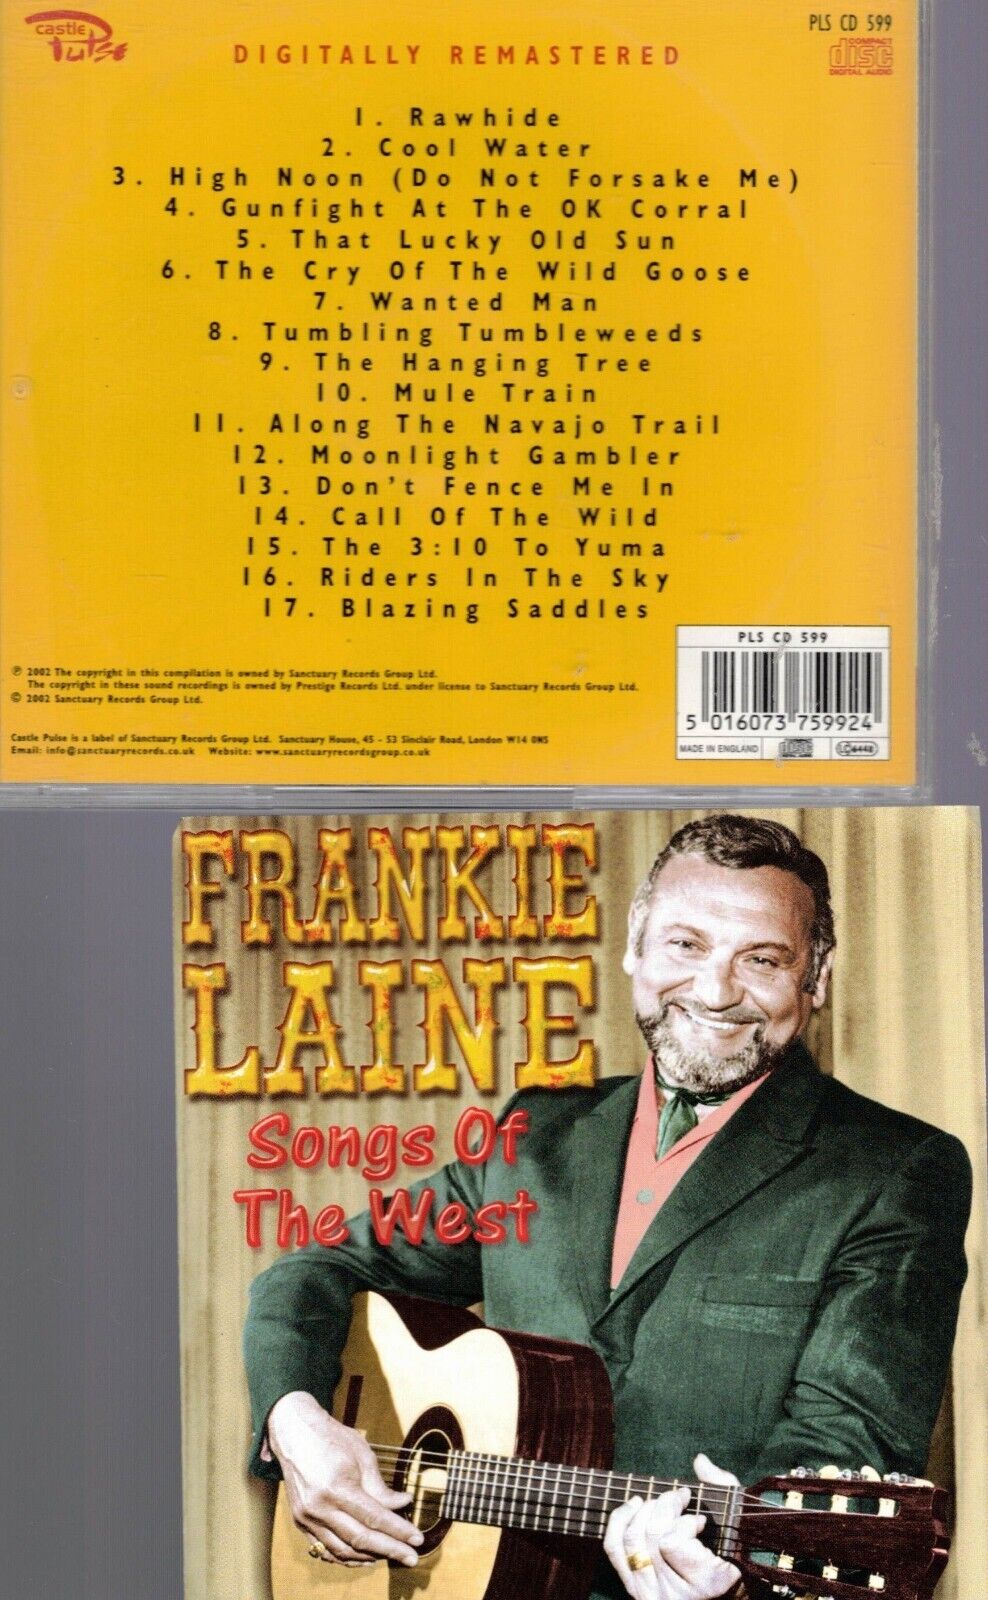 Castle Pulse cd Frankie Laine Songs Of The West like new